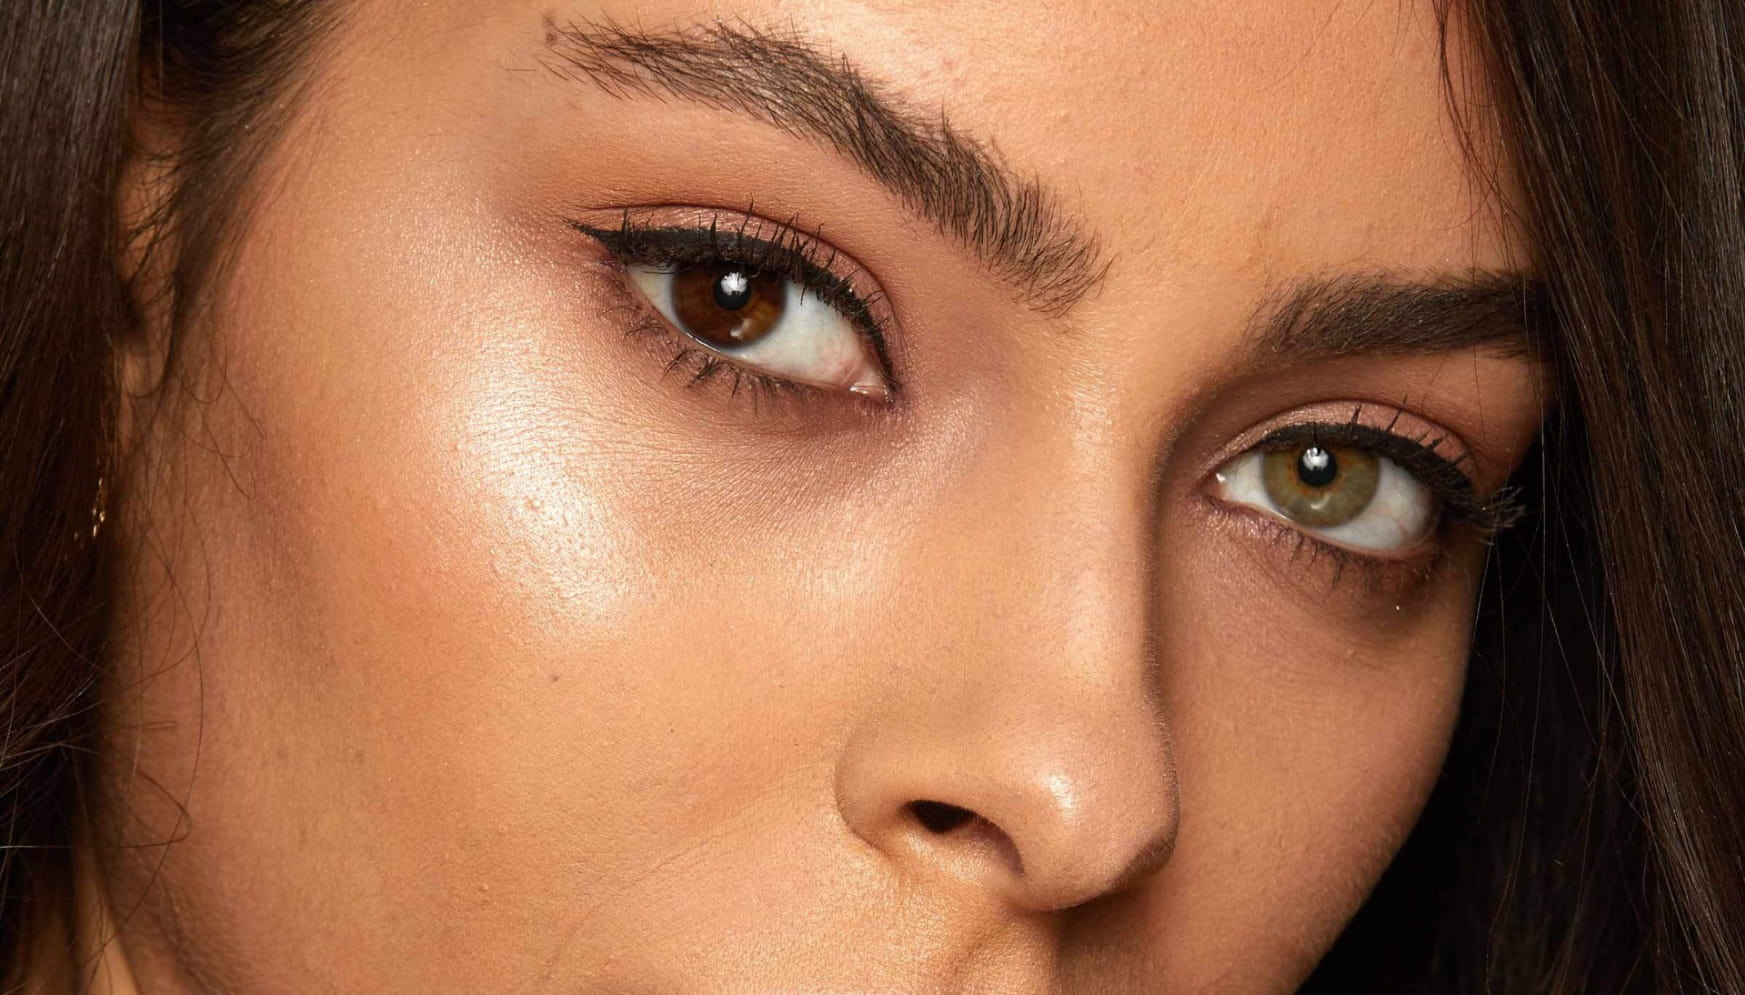 Close up image of model’s eyebrows and eyes